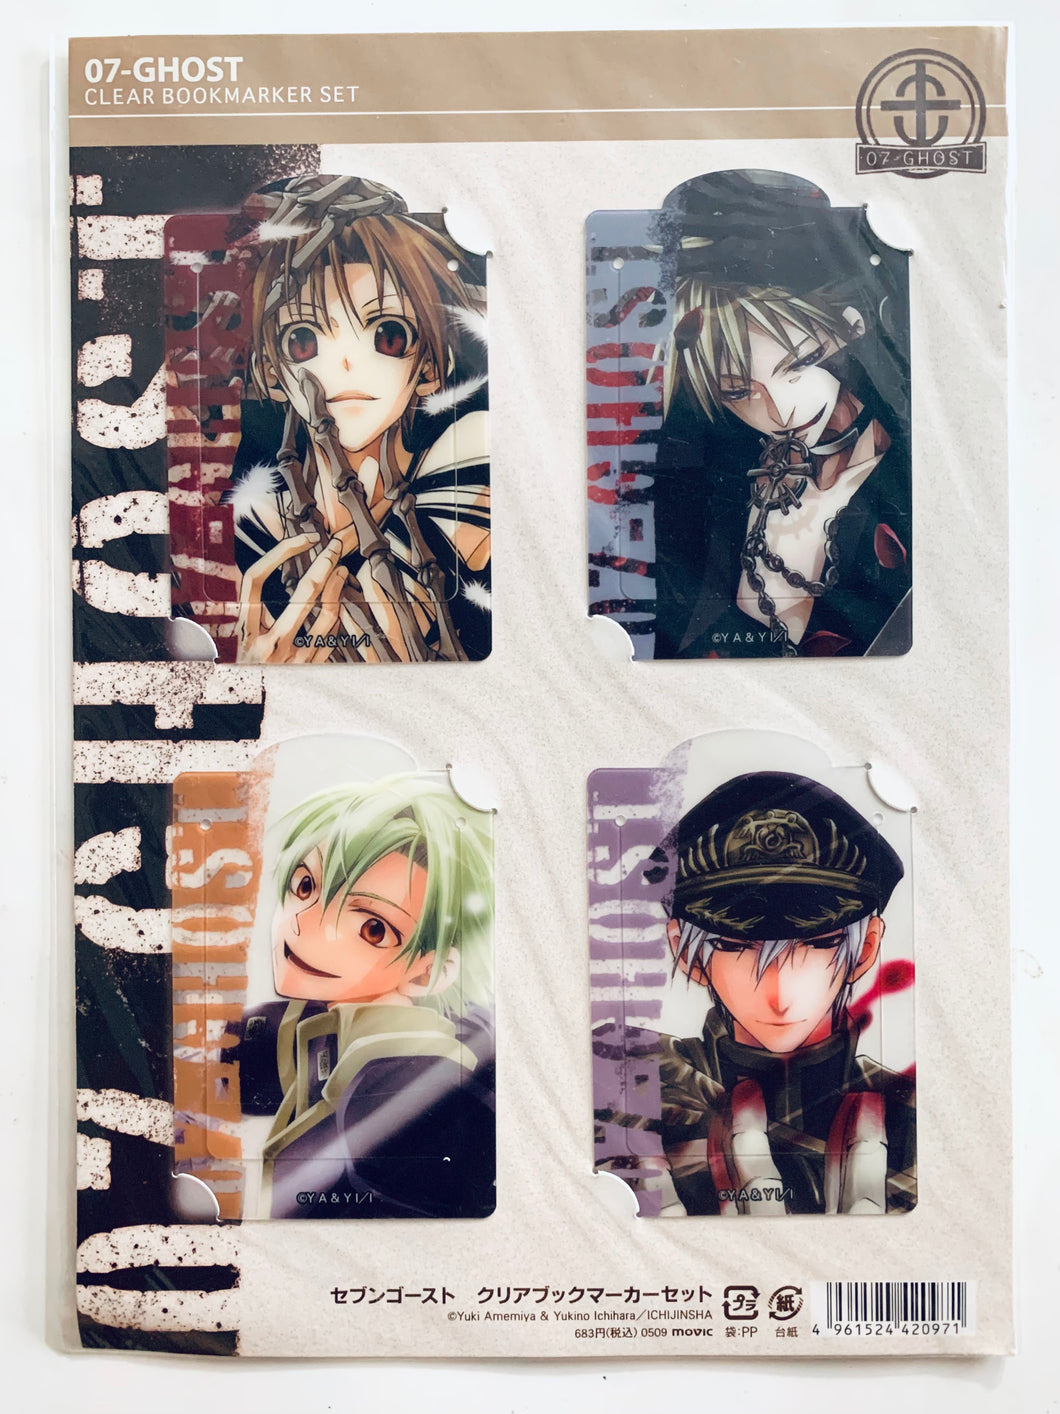 07-Ghost - Teito Klein, Frau, Mikage Celestine & Ayanami - Clear Book-marker Set